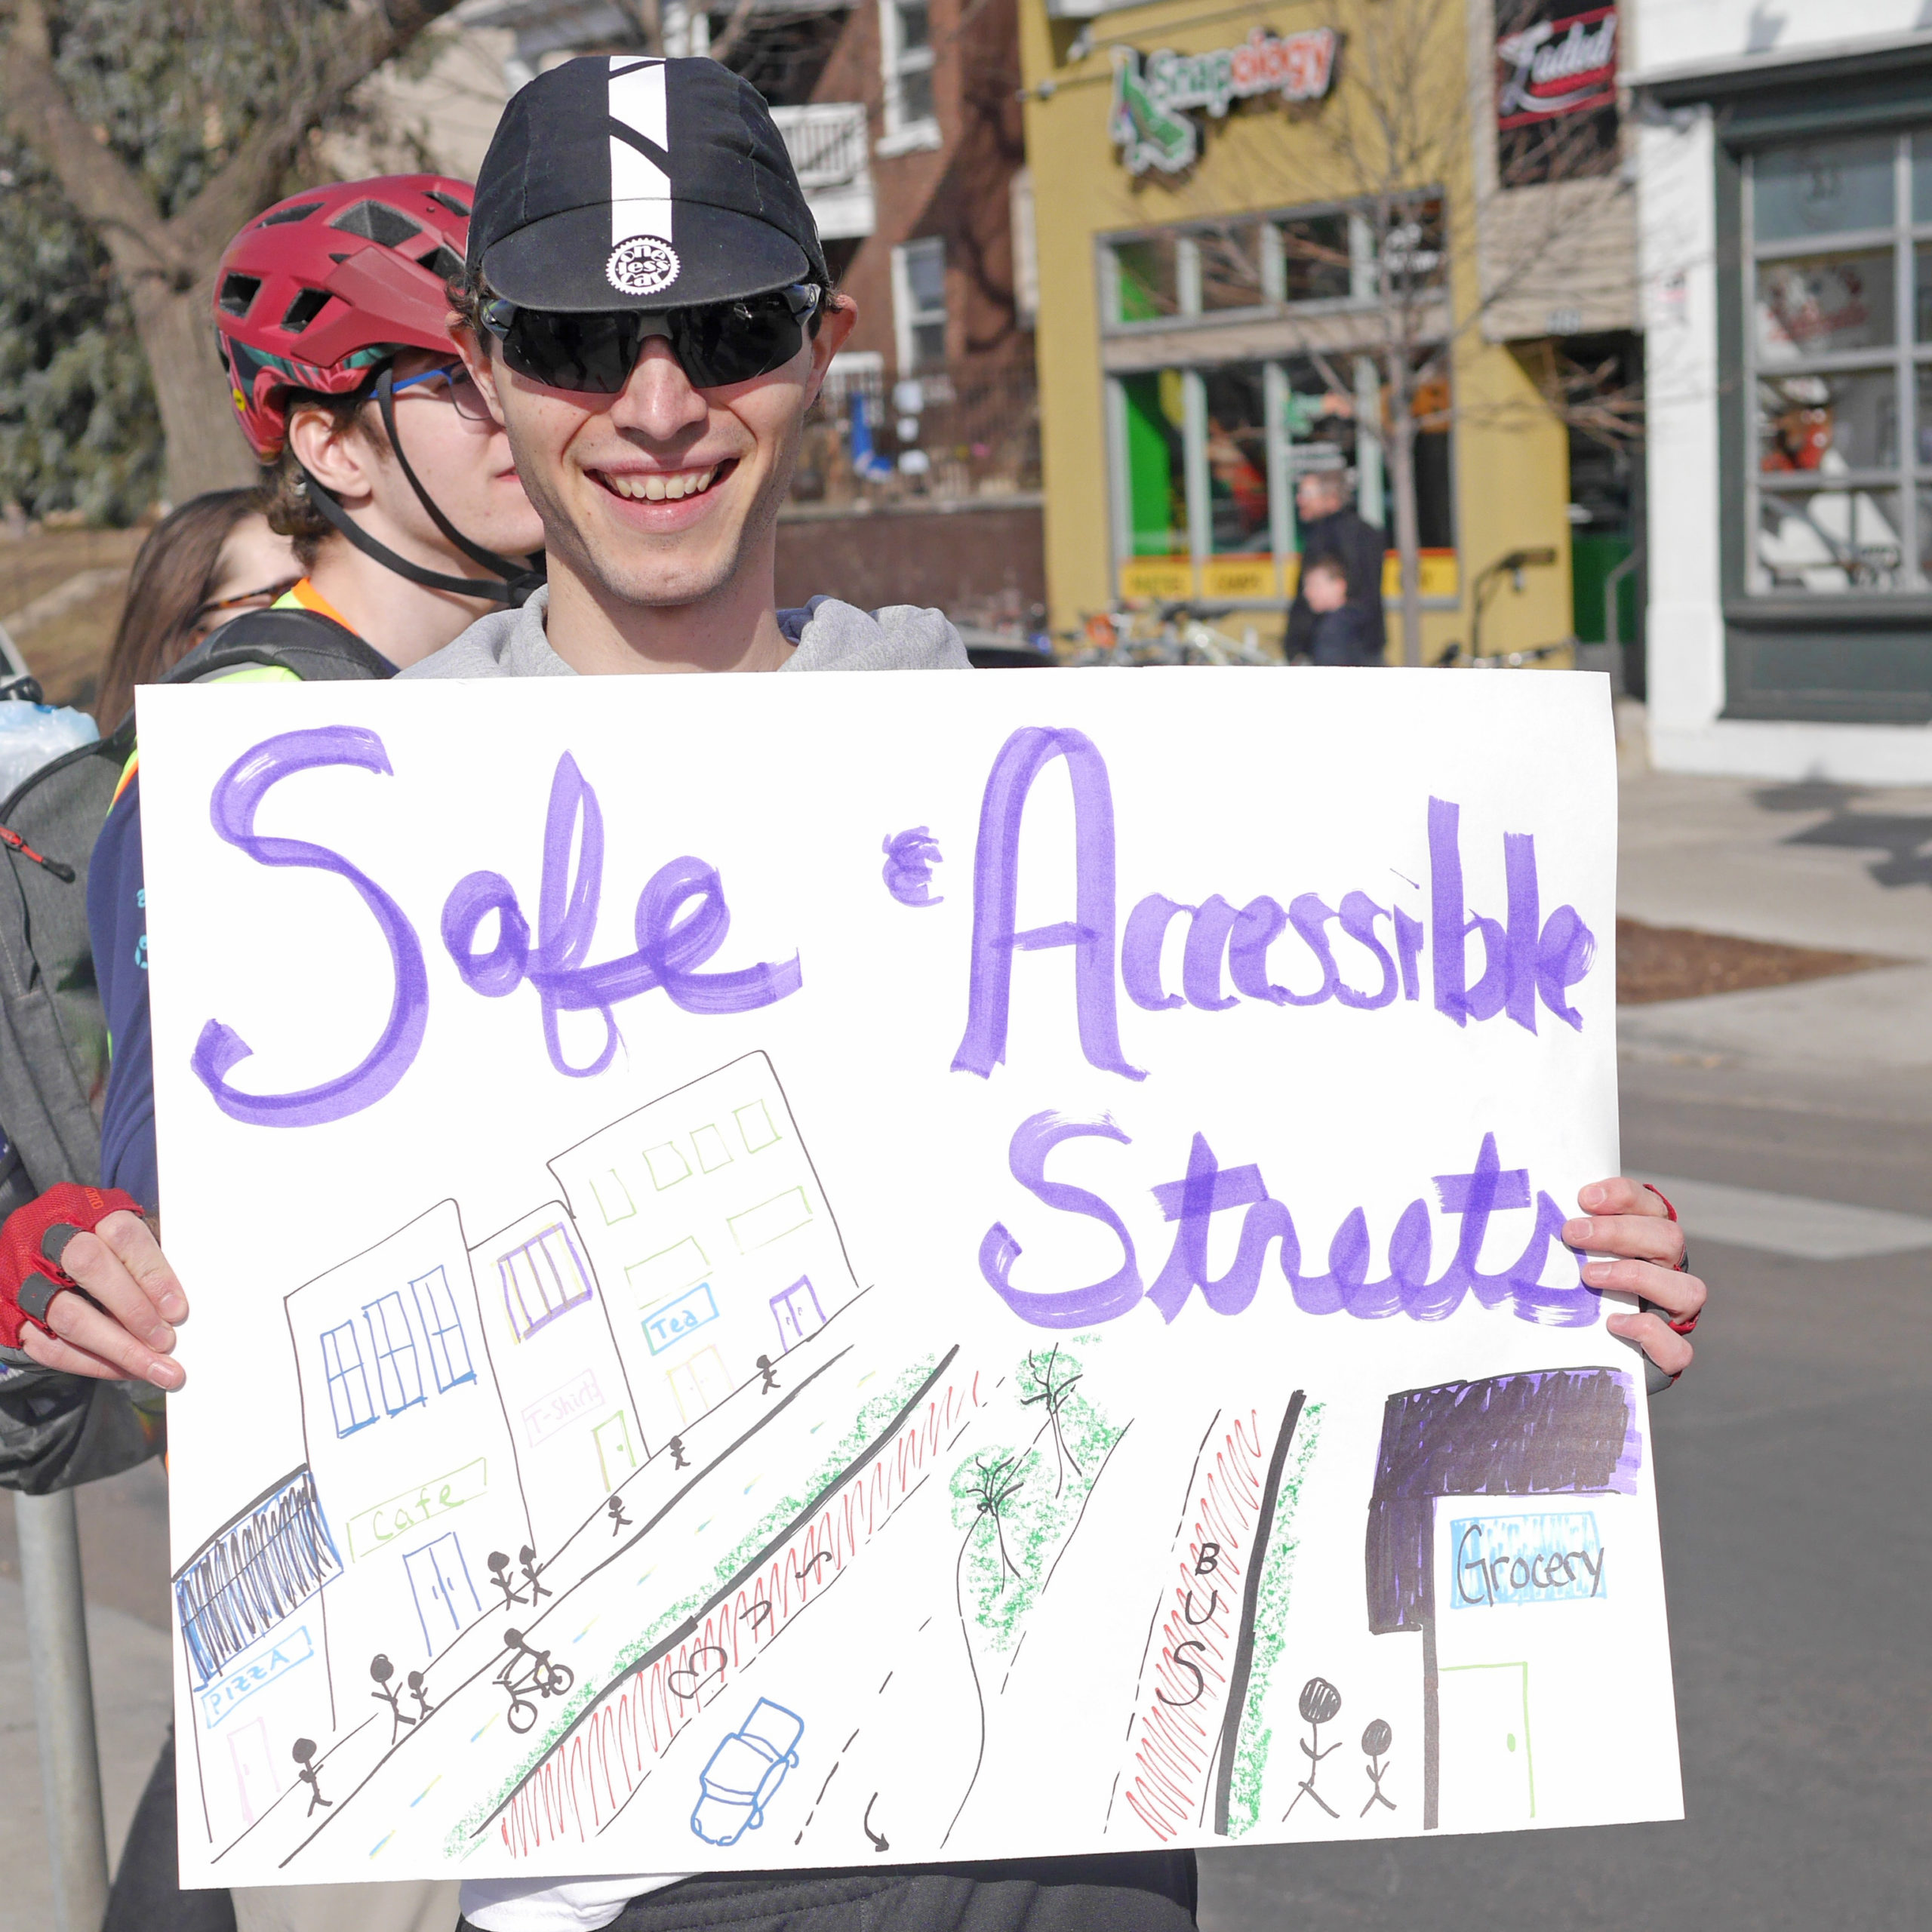 A community member wearing a black cycling cap and sunglasses holds a sign that says Safe and Accessible Streets over a drawing of a street with people walking, and biking next to businesses 